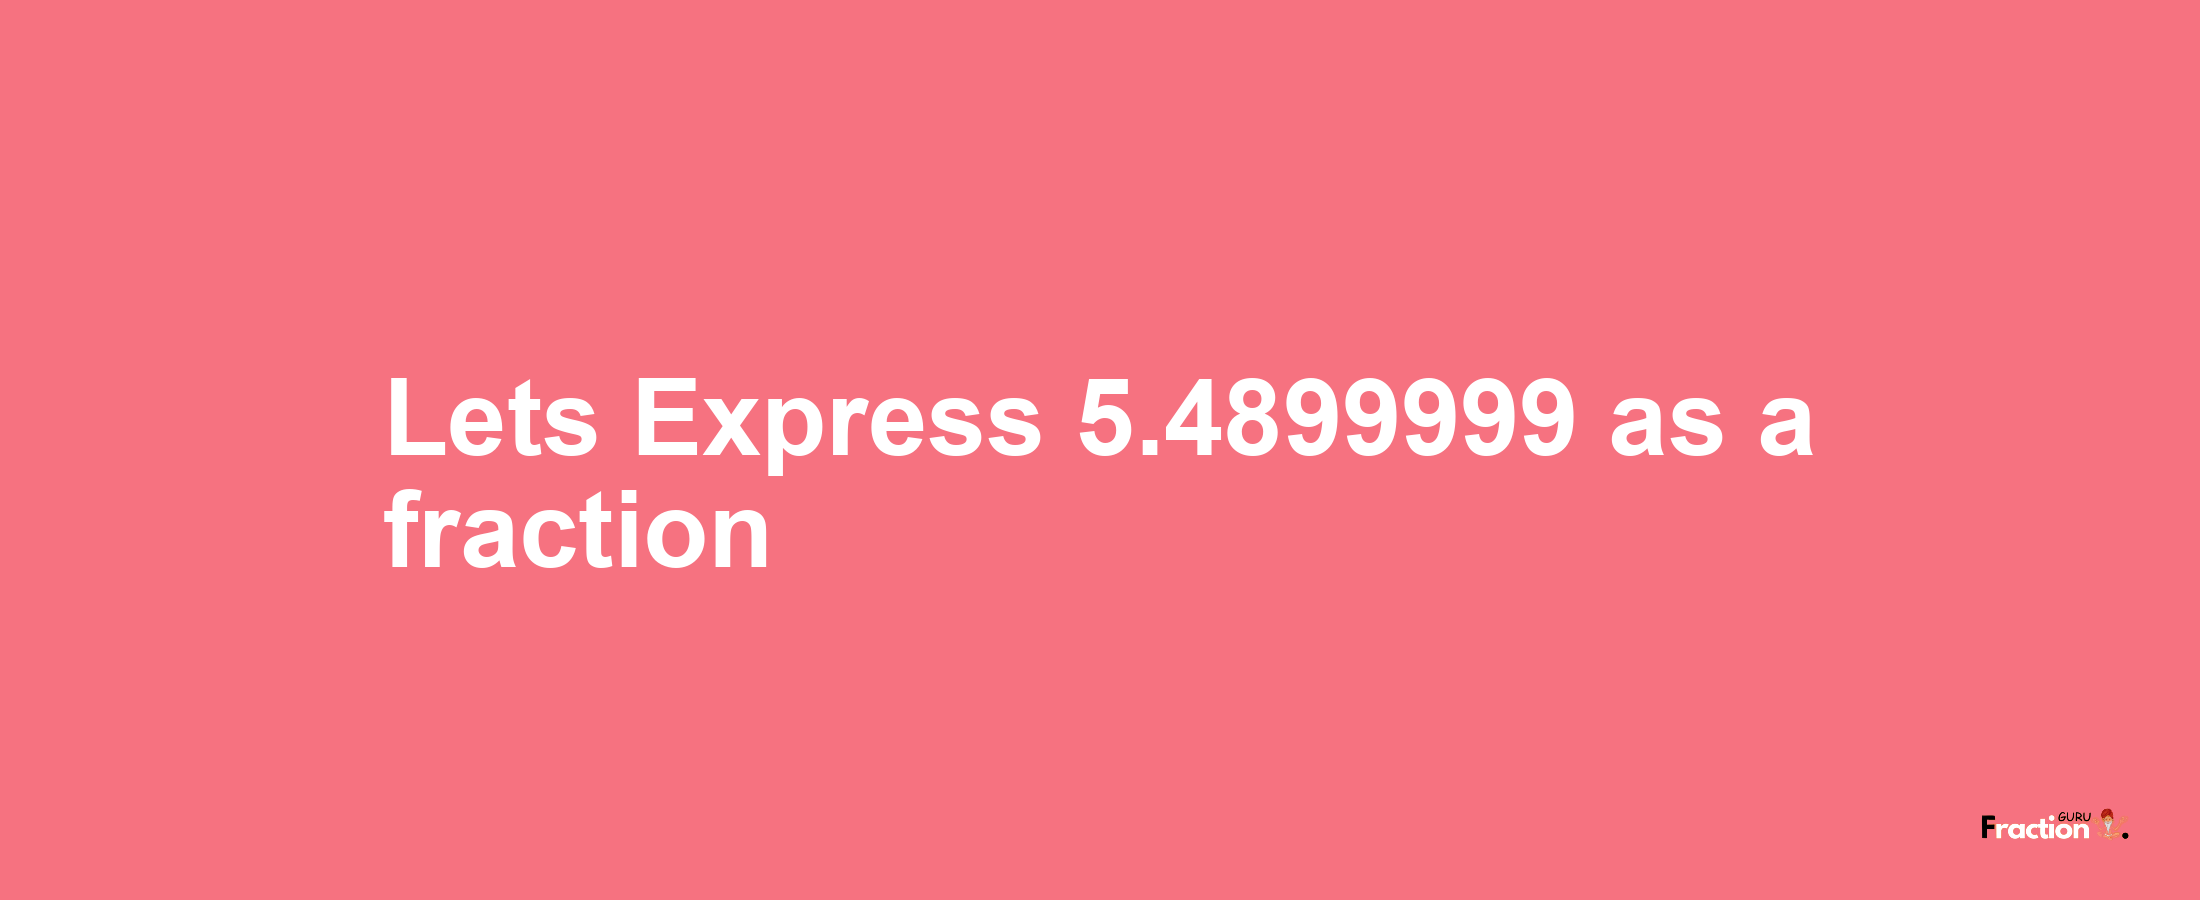 Lets Express 5.4899999 as afraction